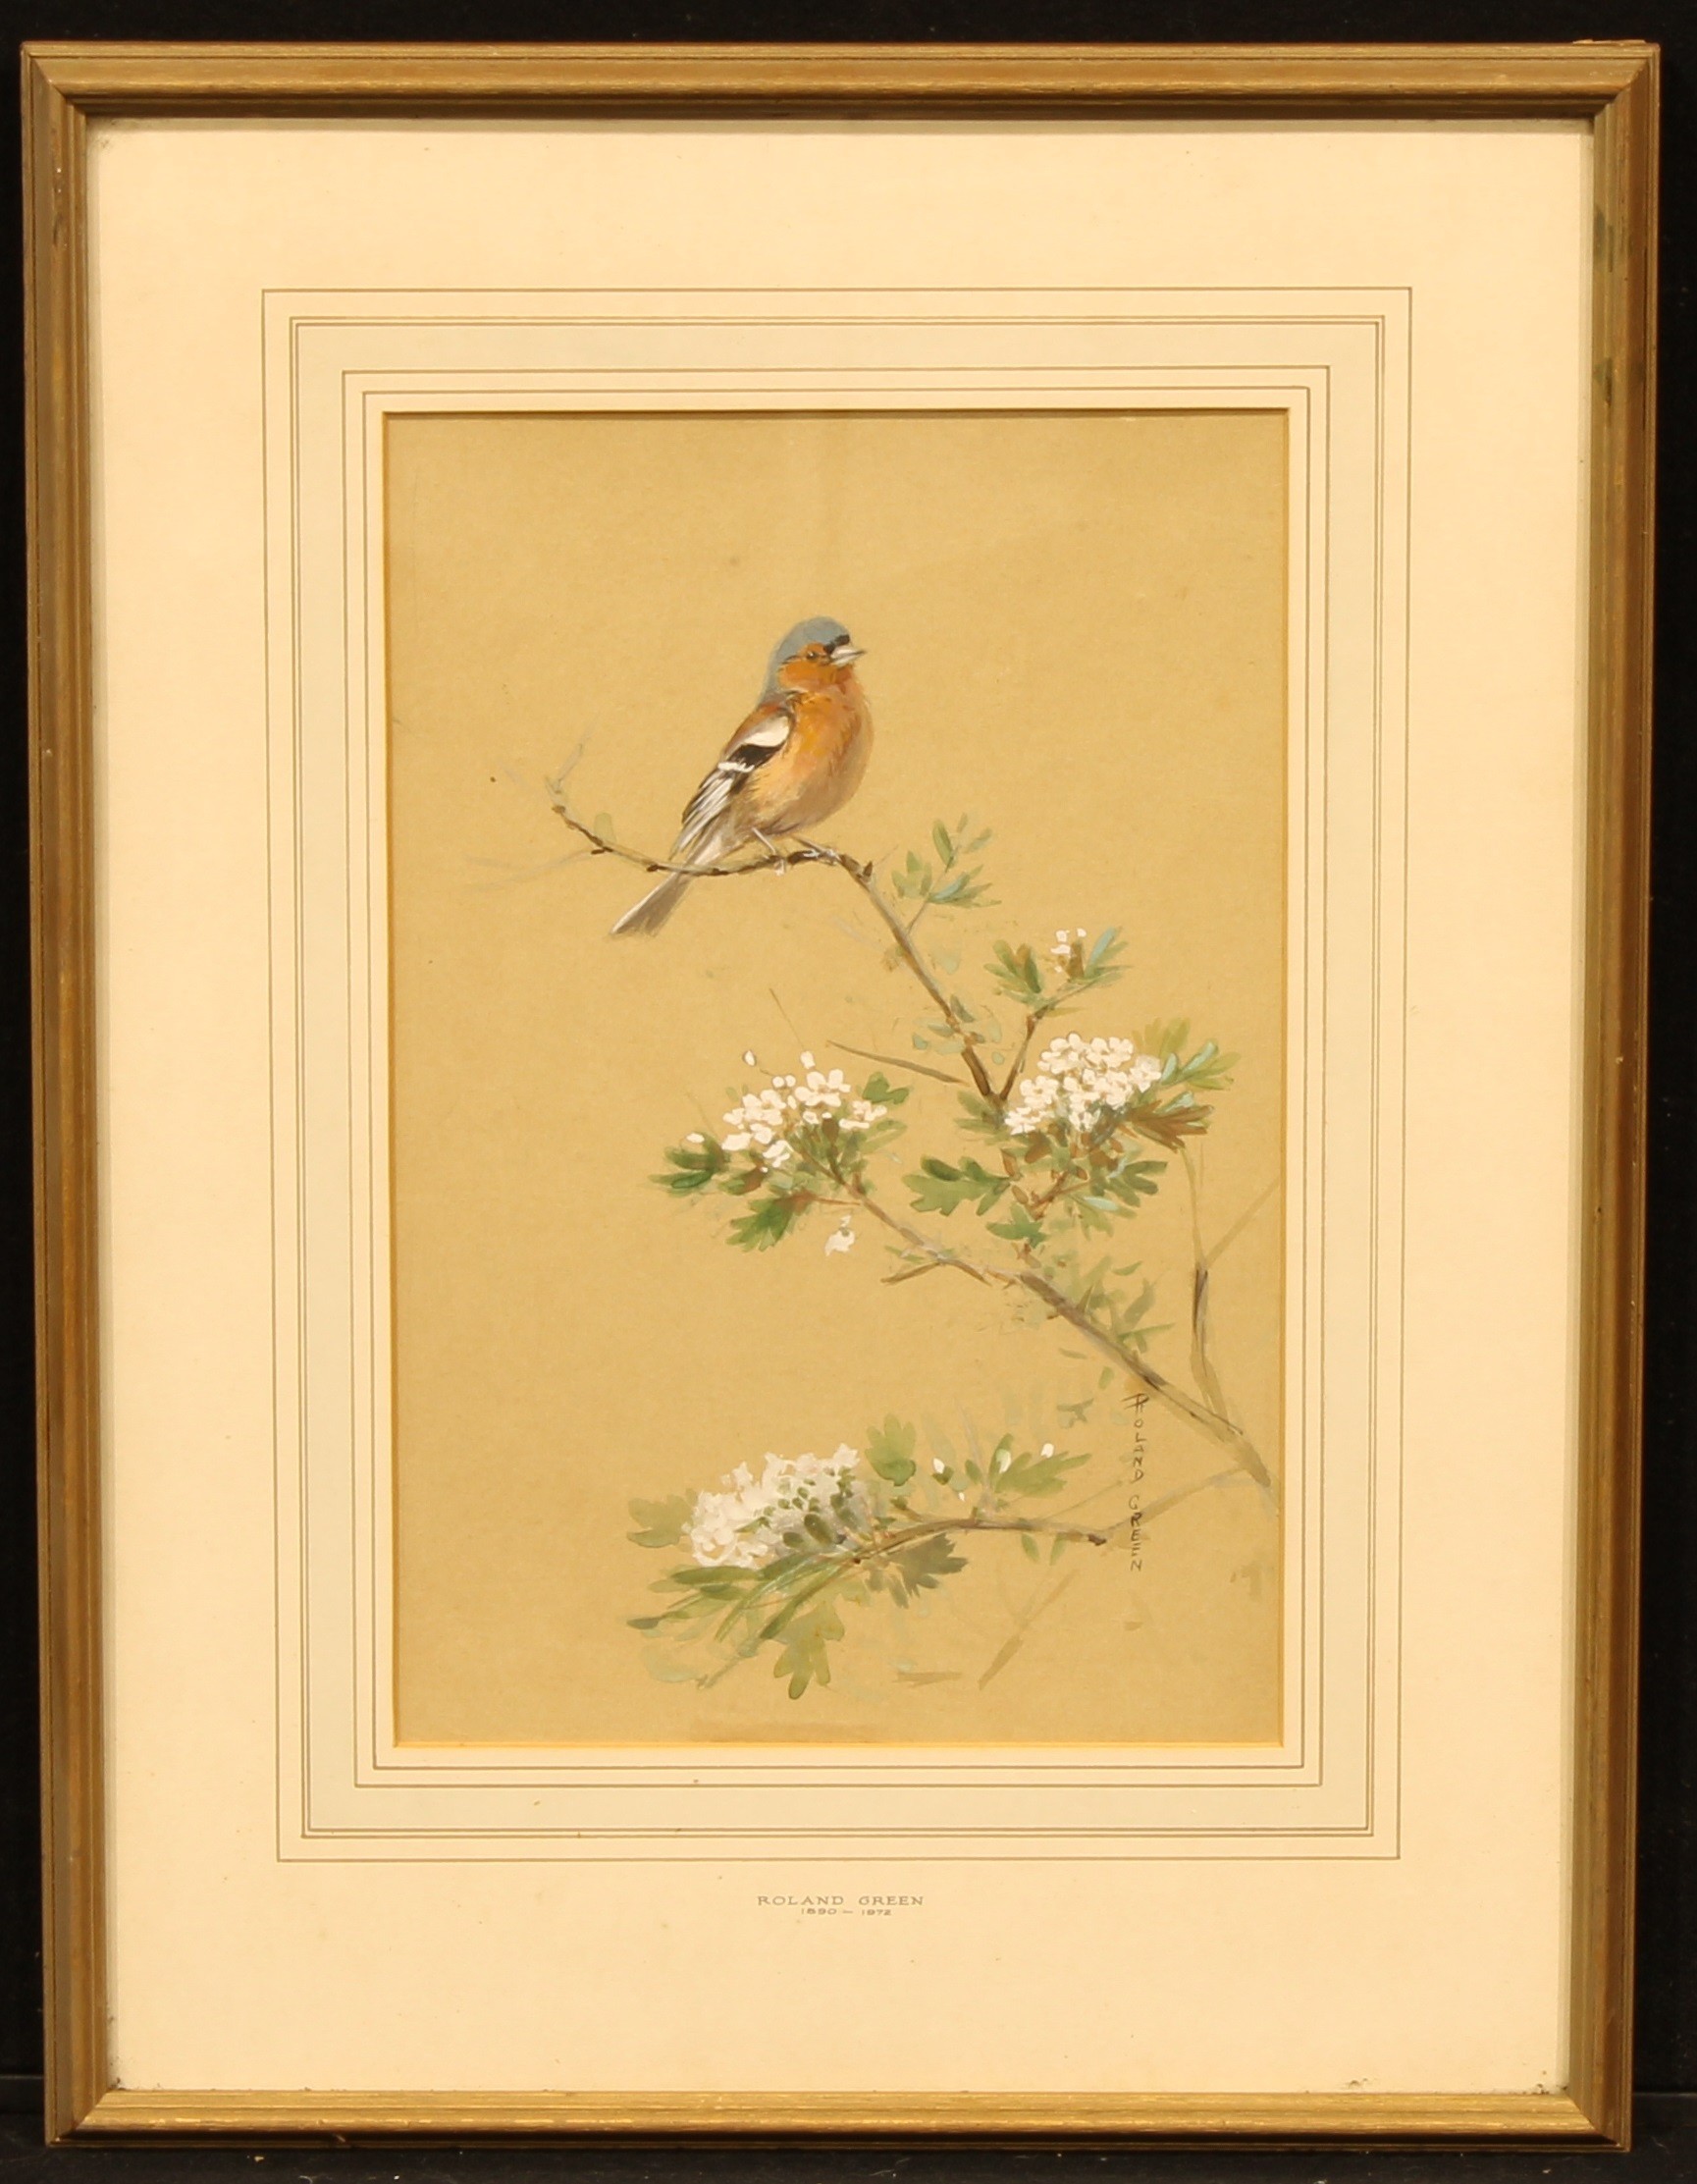 Roland Green (1890 - 1972) Bird on a Flowering Branch signed, watercolour and gouache, 33cm x 21.5cm - Image 2 of 4